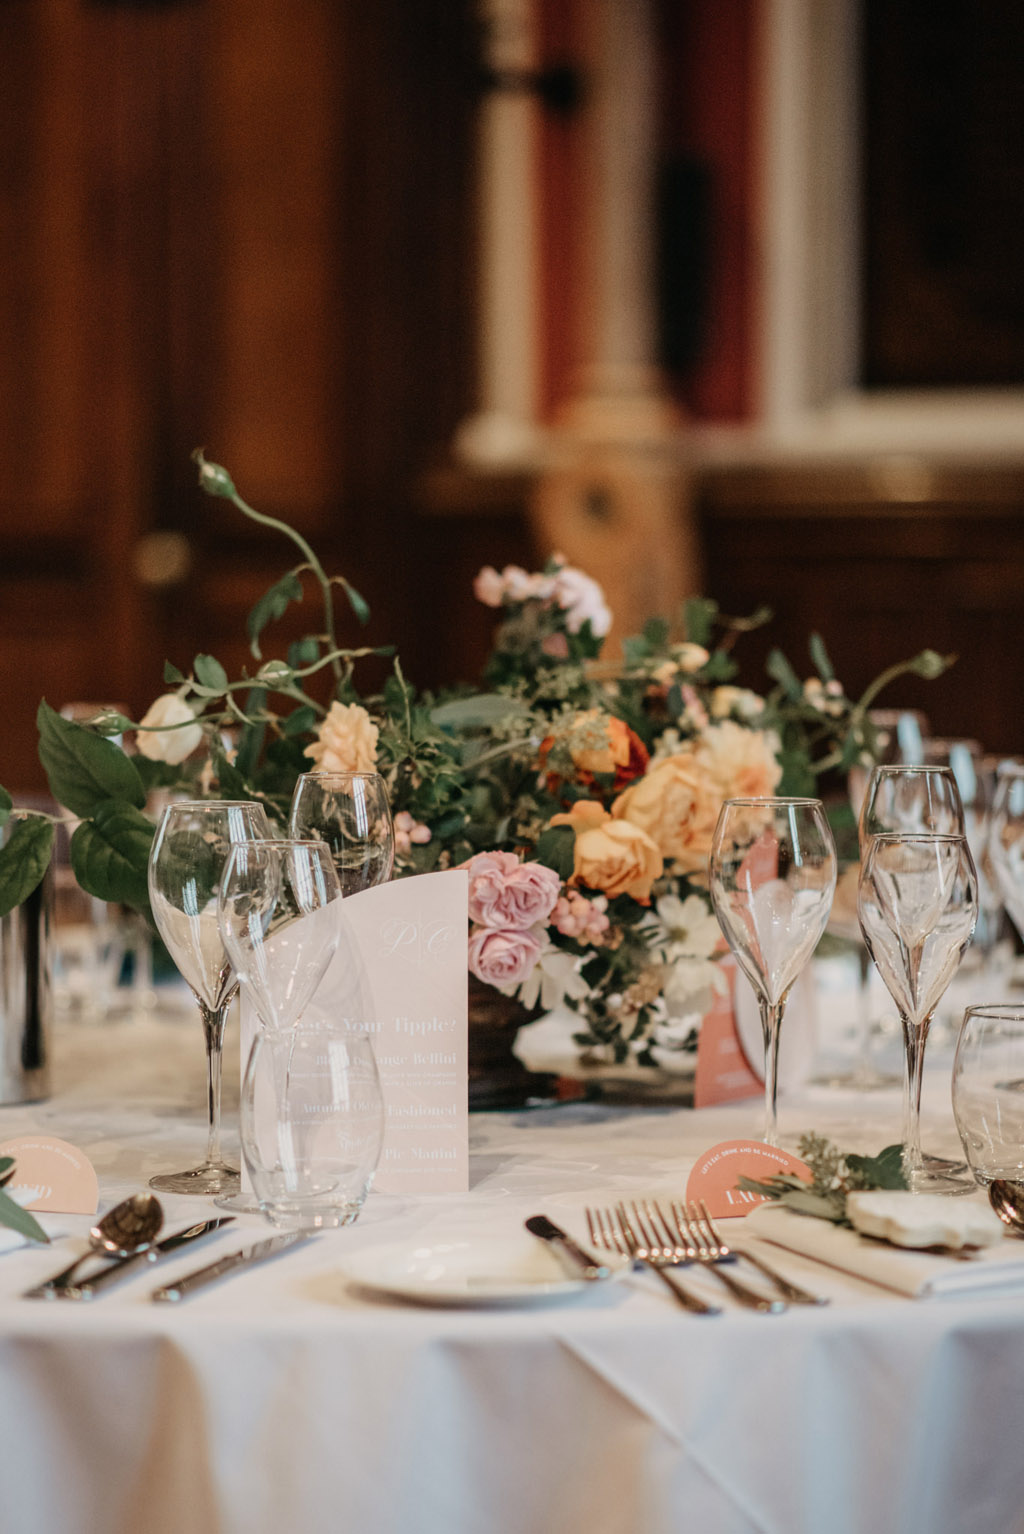  Traditional wedding inspiration with a modern twist, image credit Lottie Photography (39)